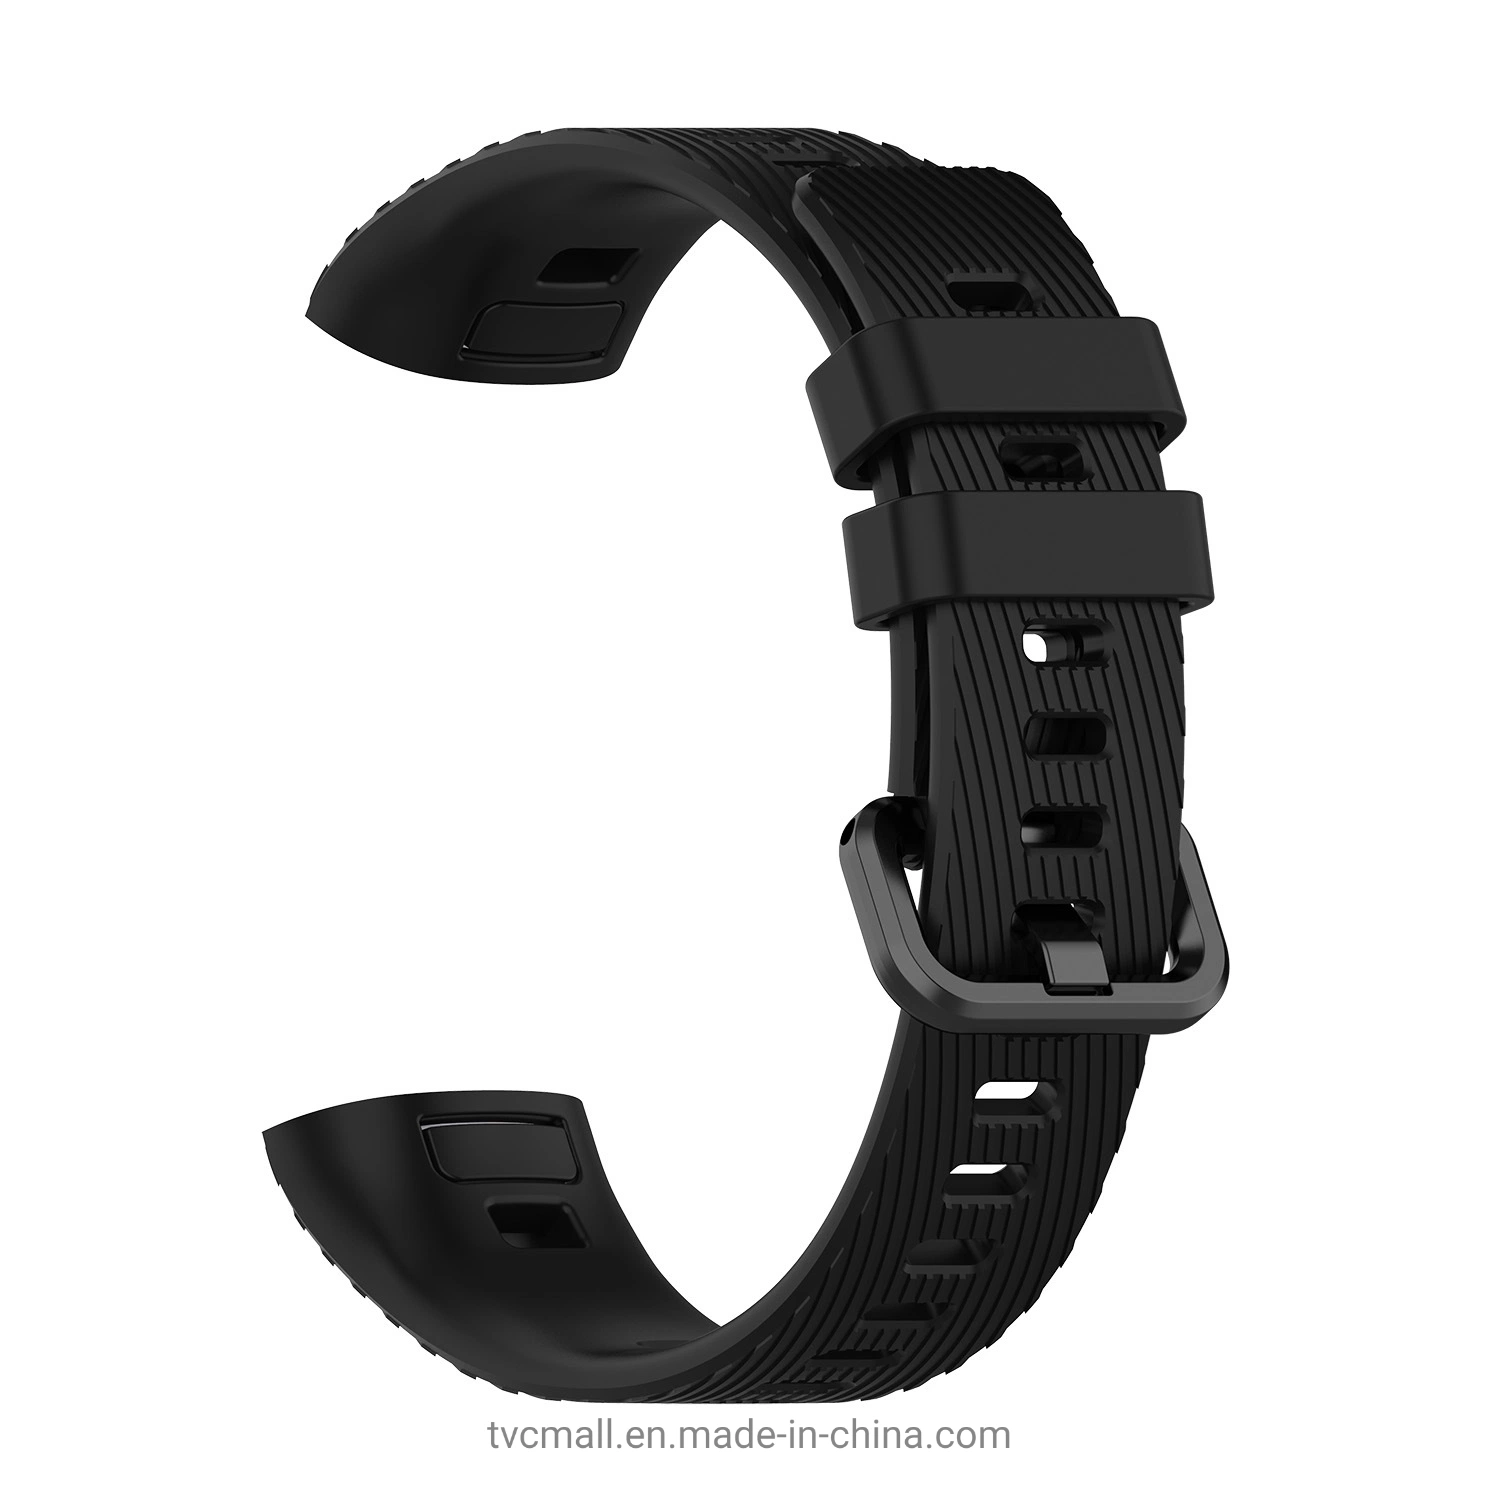 TPU Smart Bracelet Strap Replacement Band for Huawei Band 4 PRO - Black